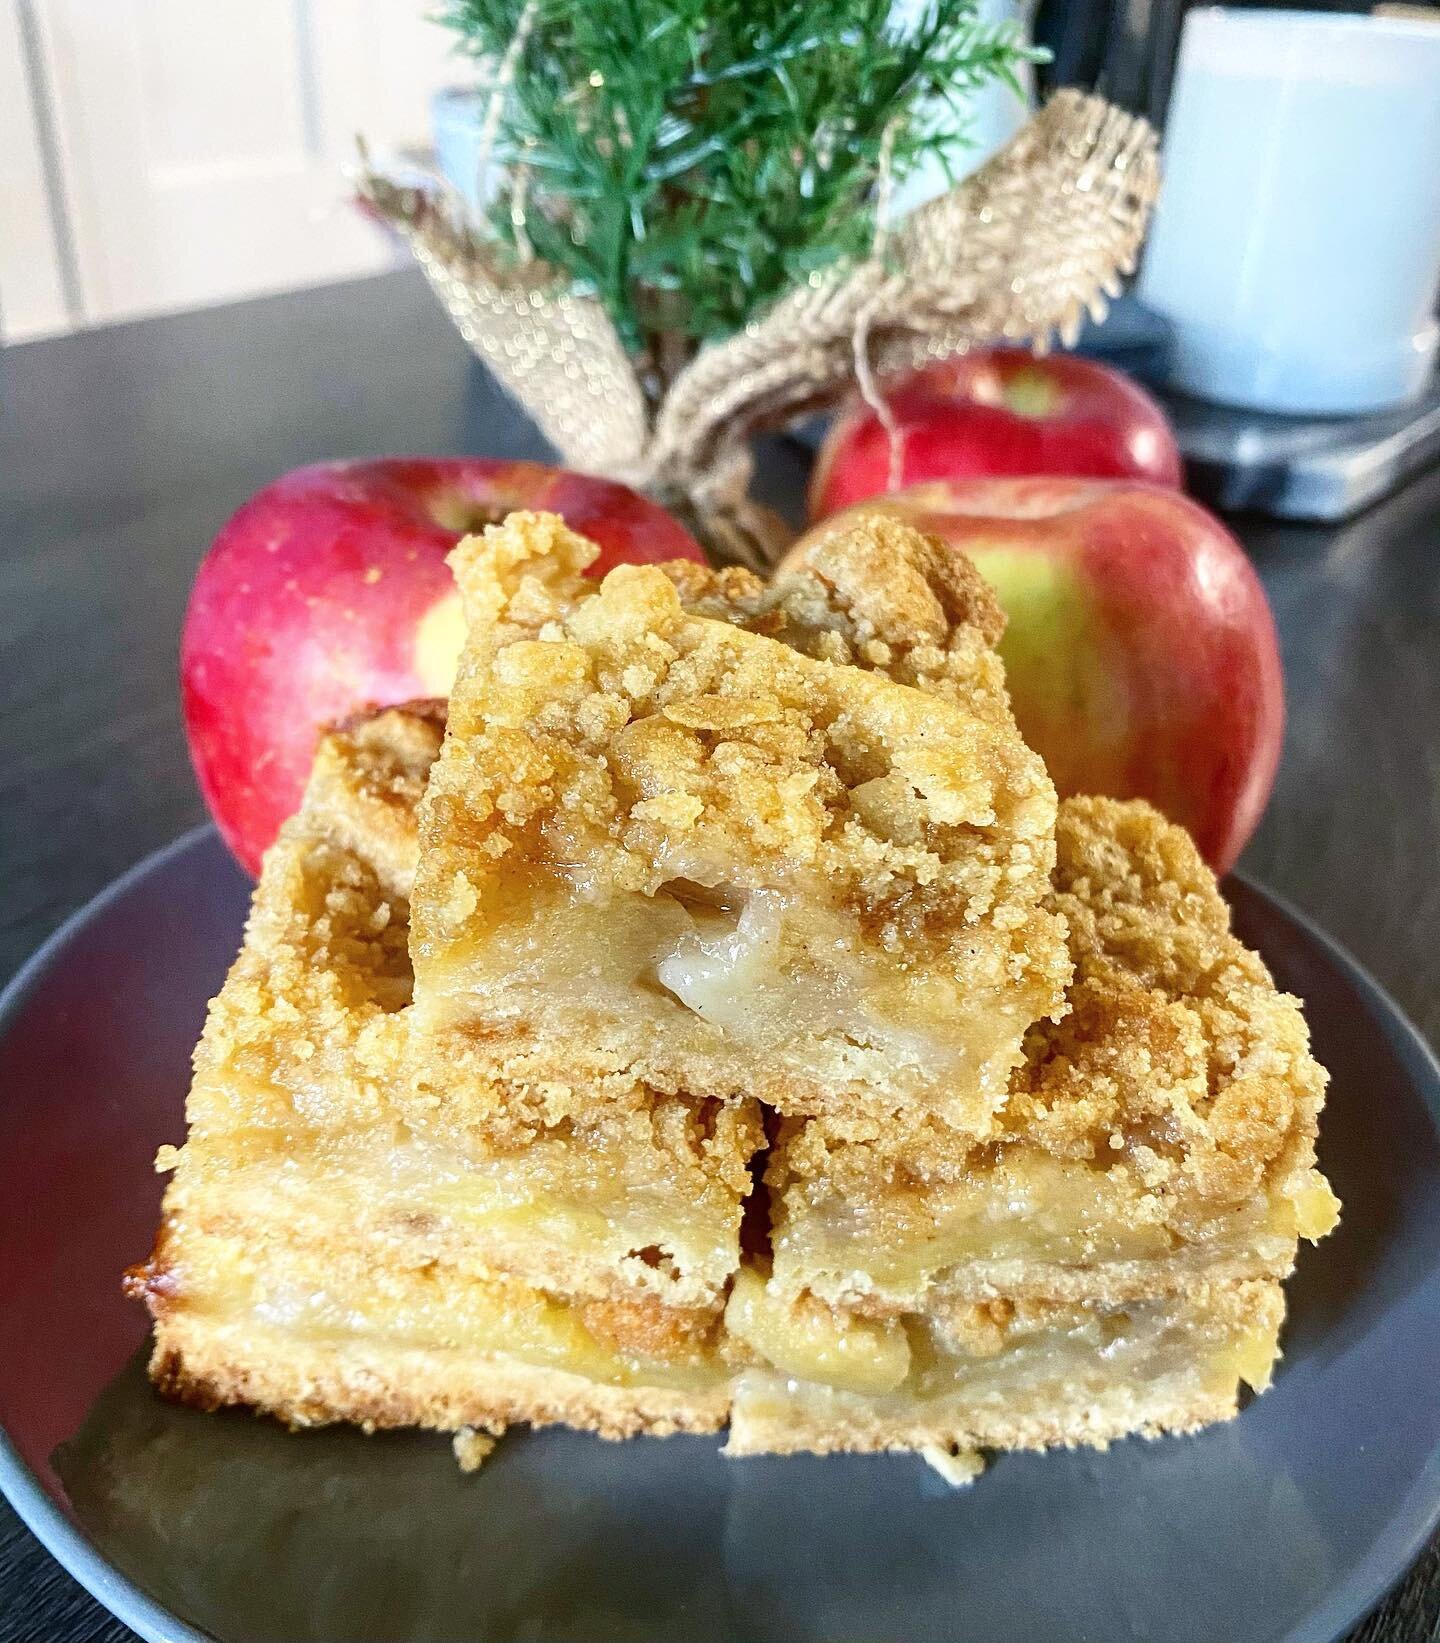 Now that we&rsquo;re deep into fall, it will be your last chance to get your hands on some fall desserts 😋

This week we will be offering our Apple Crisp Bars in our takeout window. These are made with a shortbread crust, filled with fresh apples, a